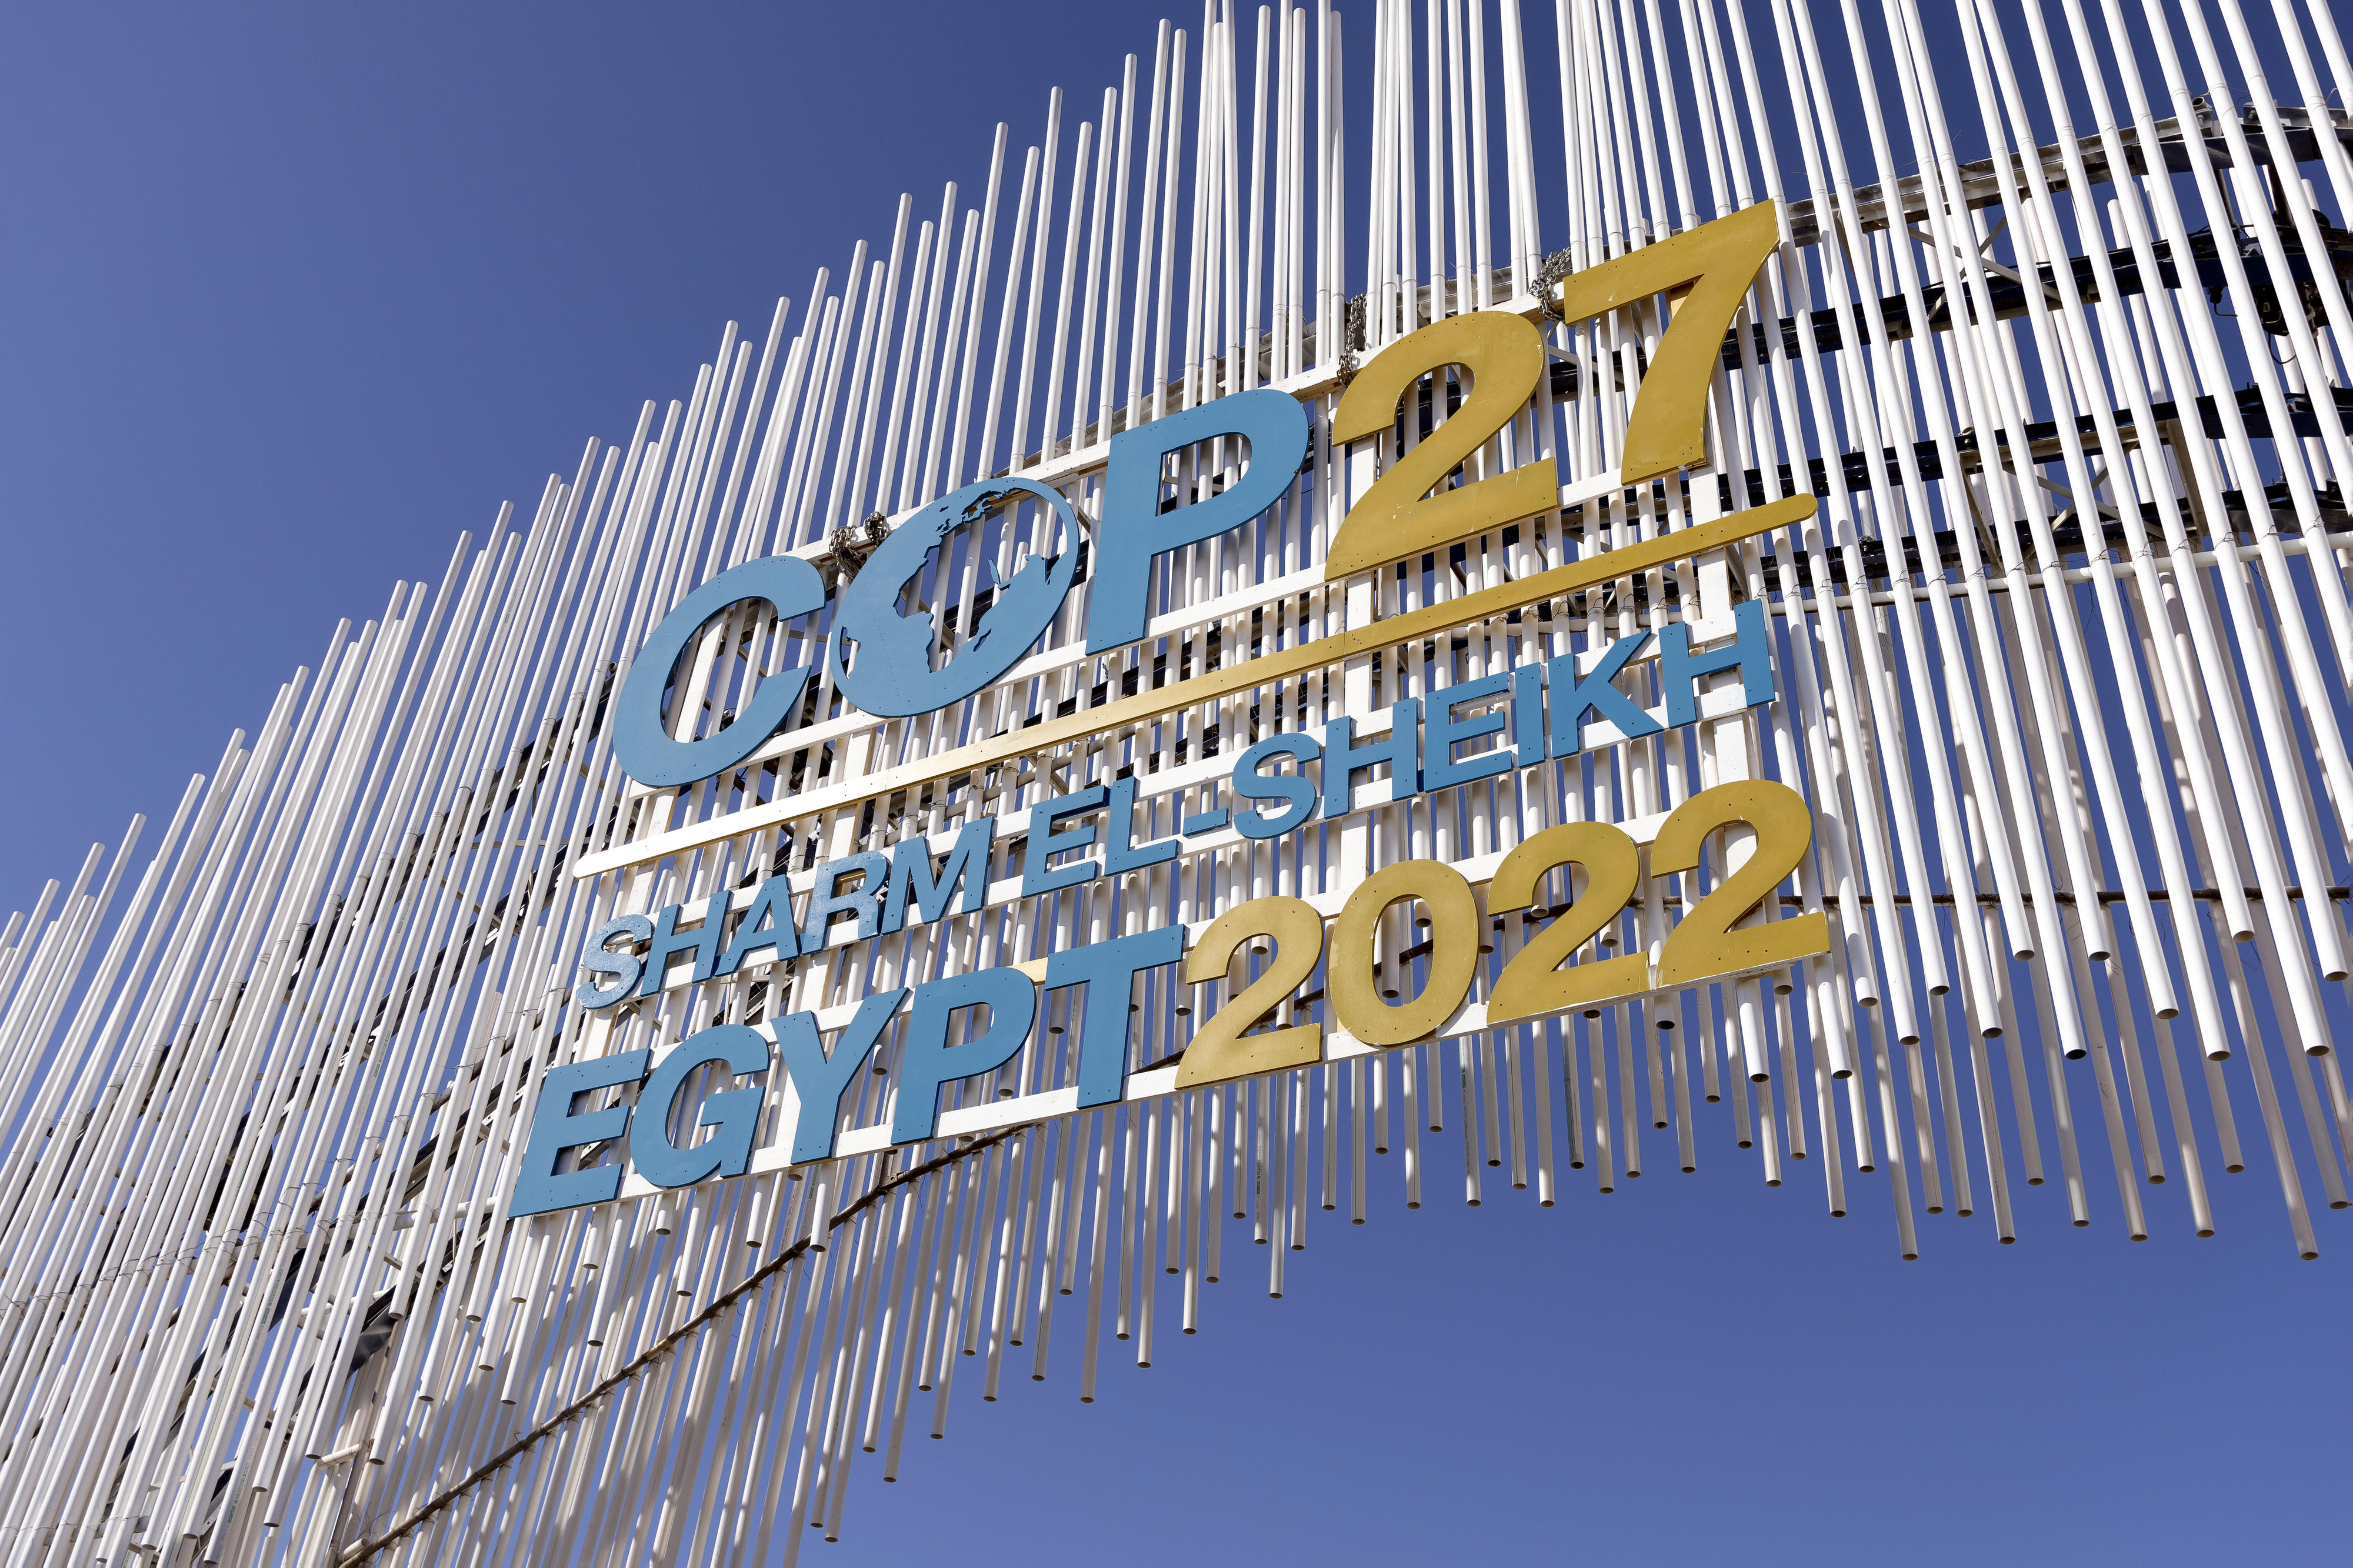 Event building with lettering: COP27 Sharm El-Sheikh, Egypt 2022